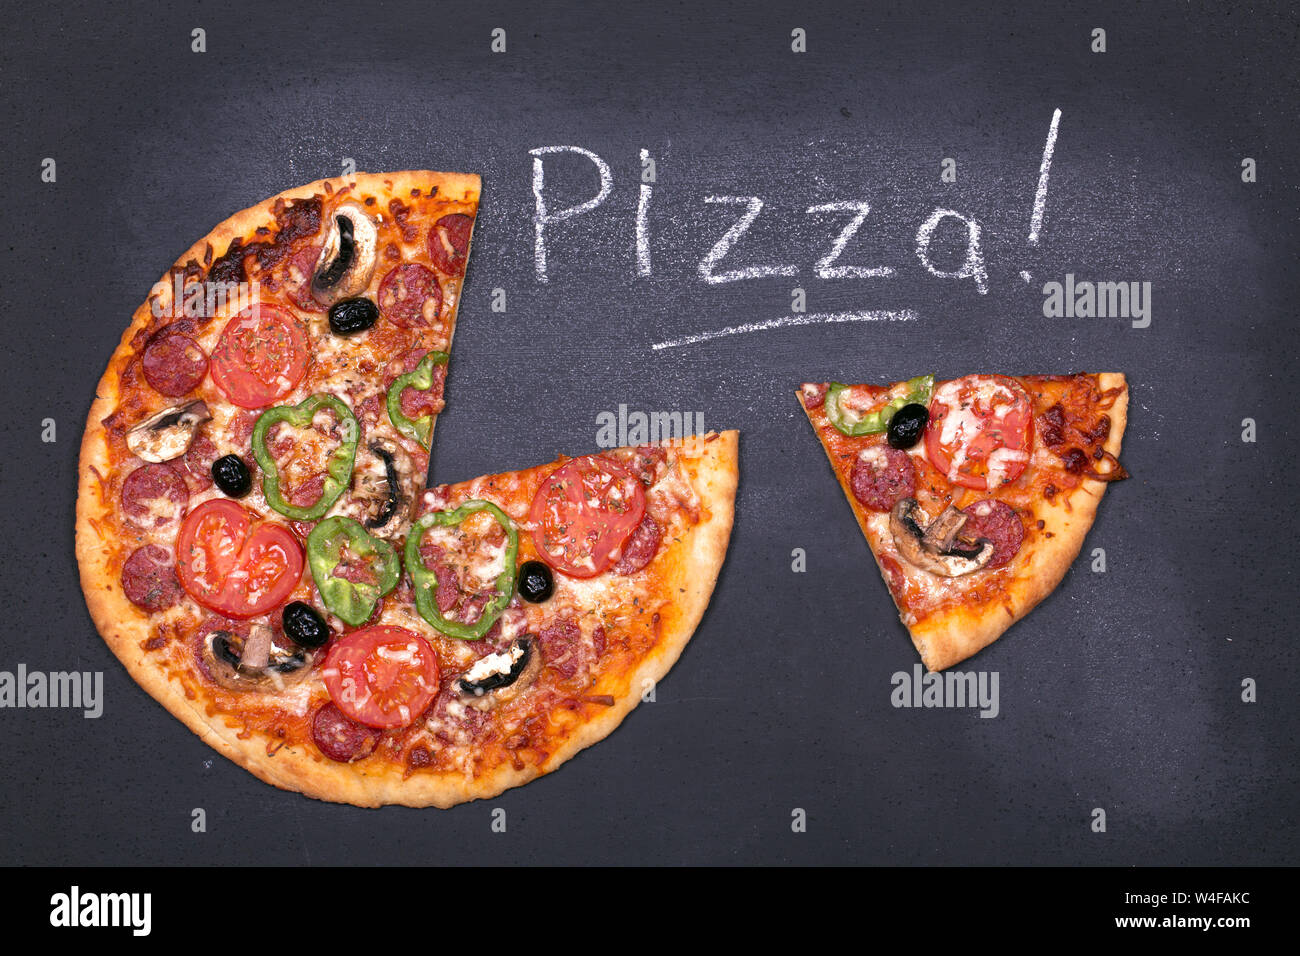 Pizza on chalkboard, with the word Pizza written in chalk. Stock Photo